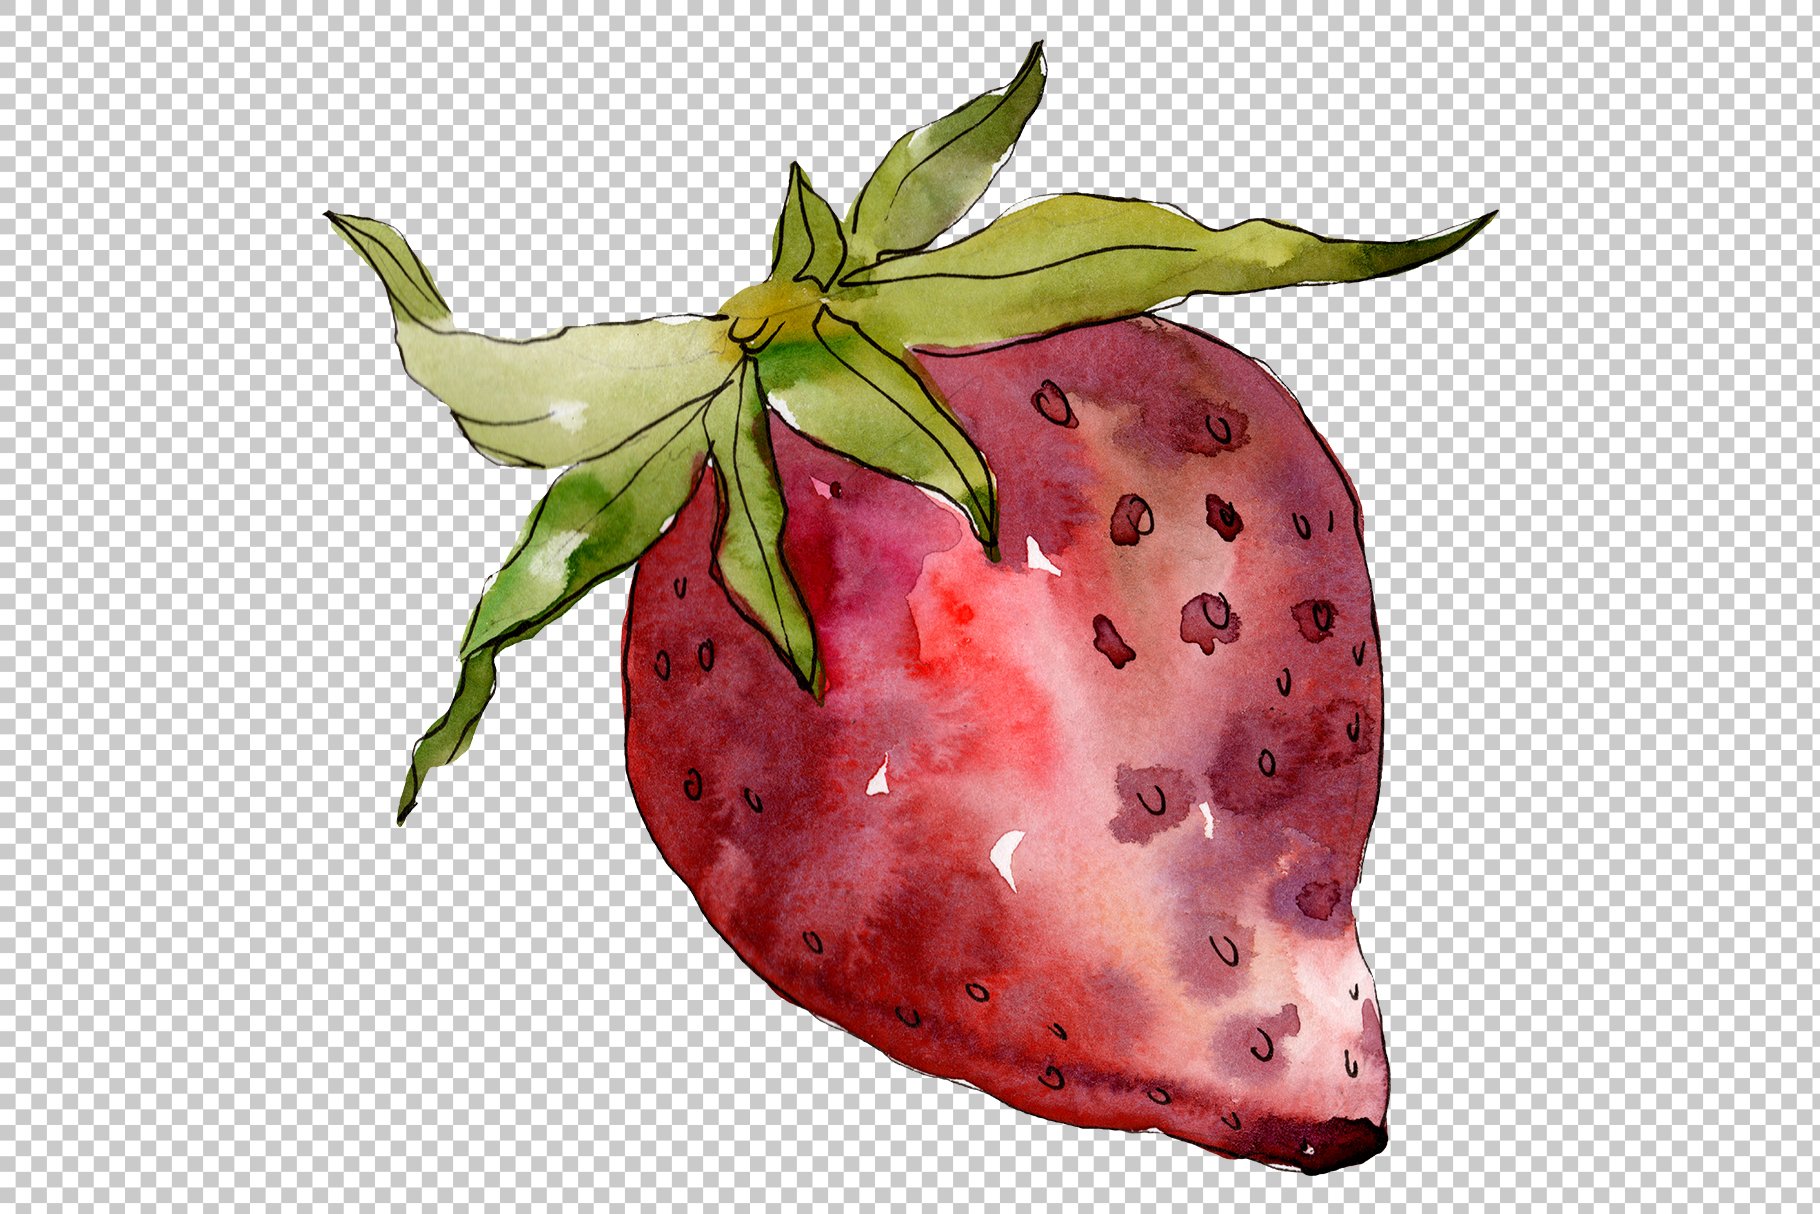 Hand painted strawberry in a watercolor.